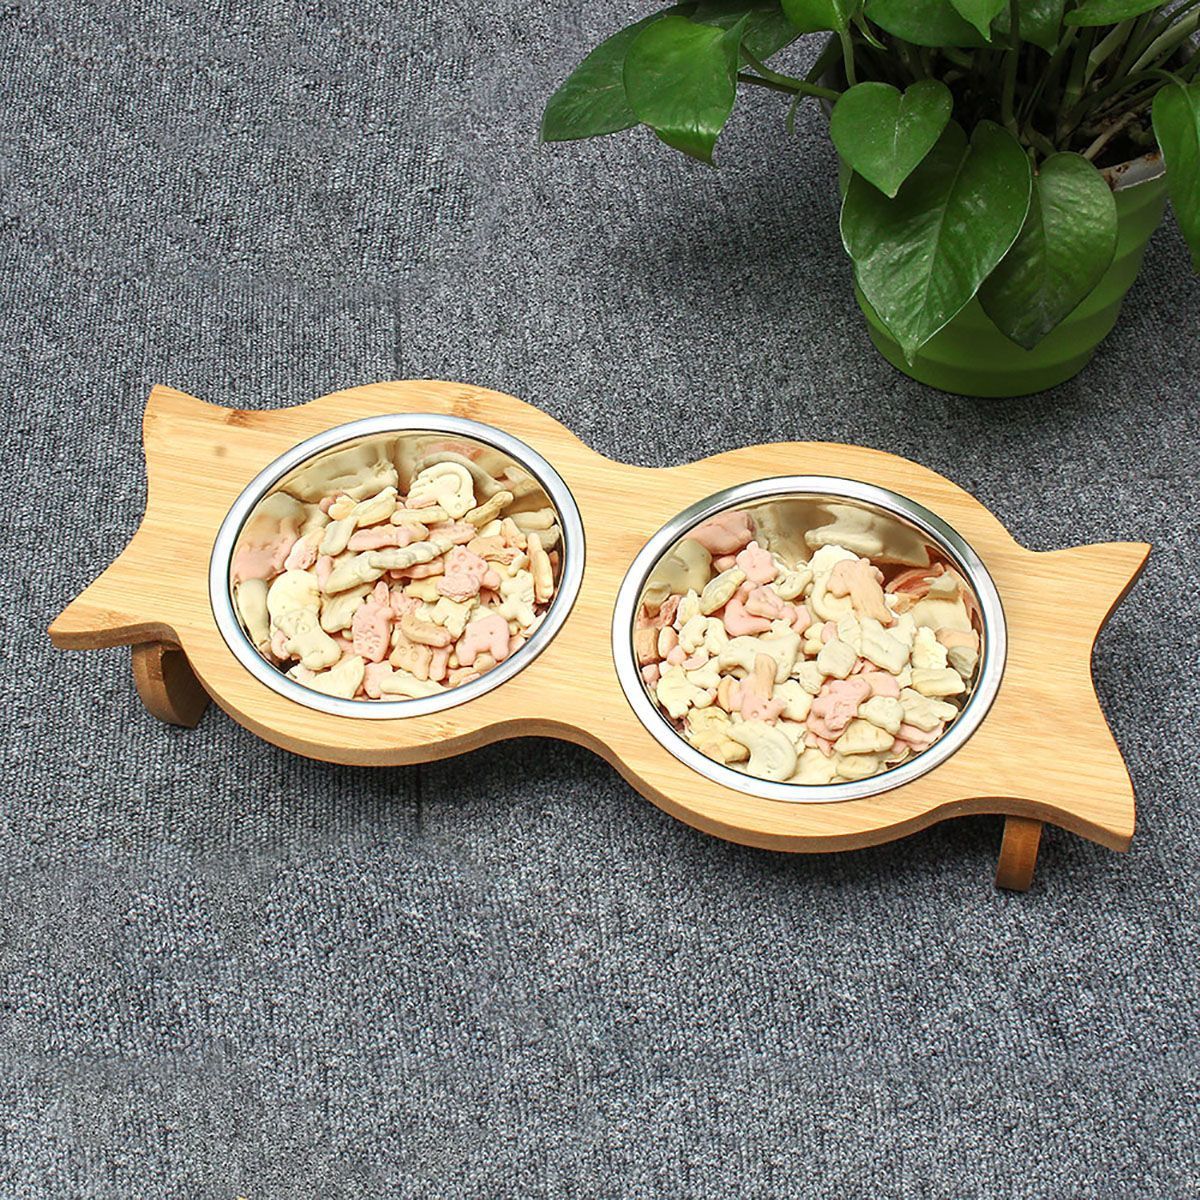 Large-Double-Pet-Bowl-Feeder-Cat-Dog-Food-Pot-Stand-Puppy-Stainless-SteelCeramics-1572037